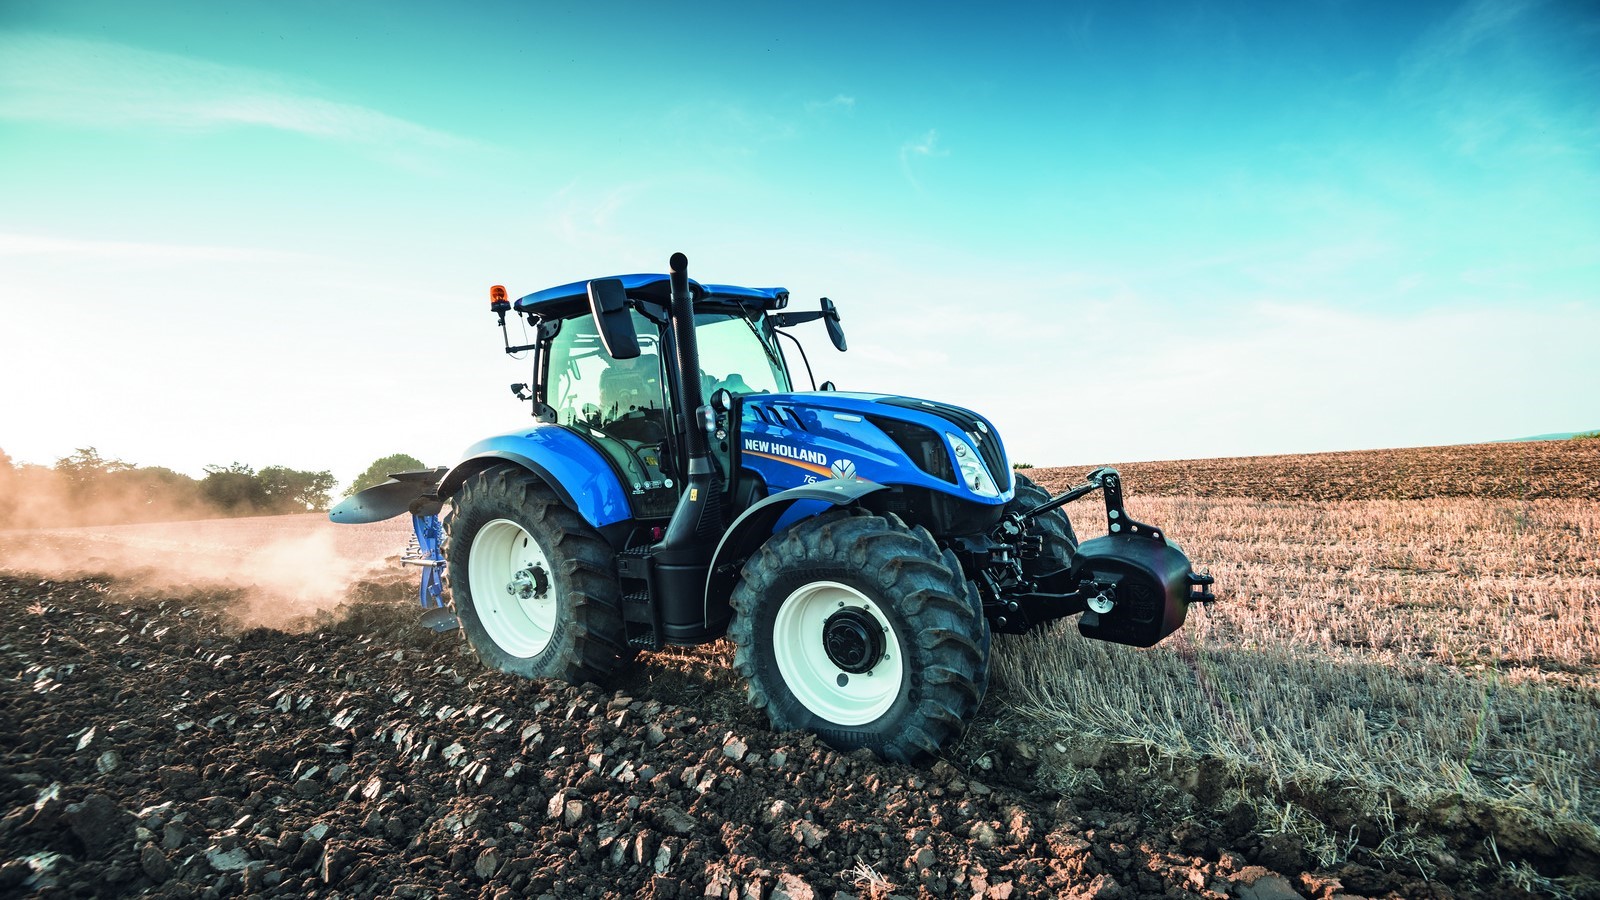 Cubic Telecom goes off-road announcing ‘smart farming’ partnership with CNH Industrial